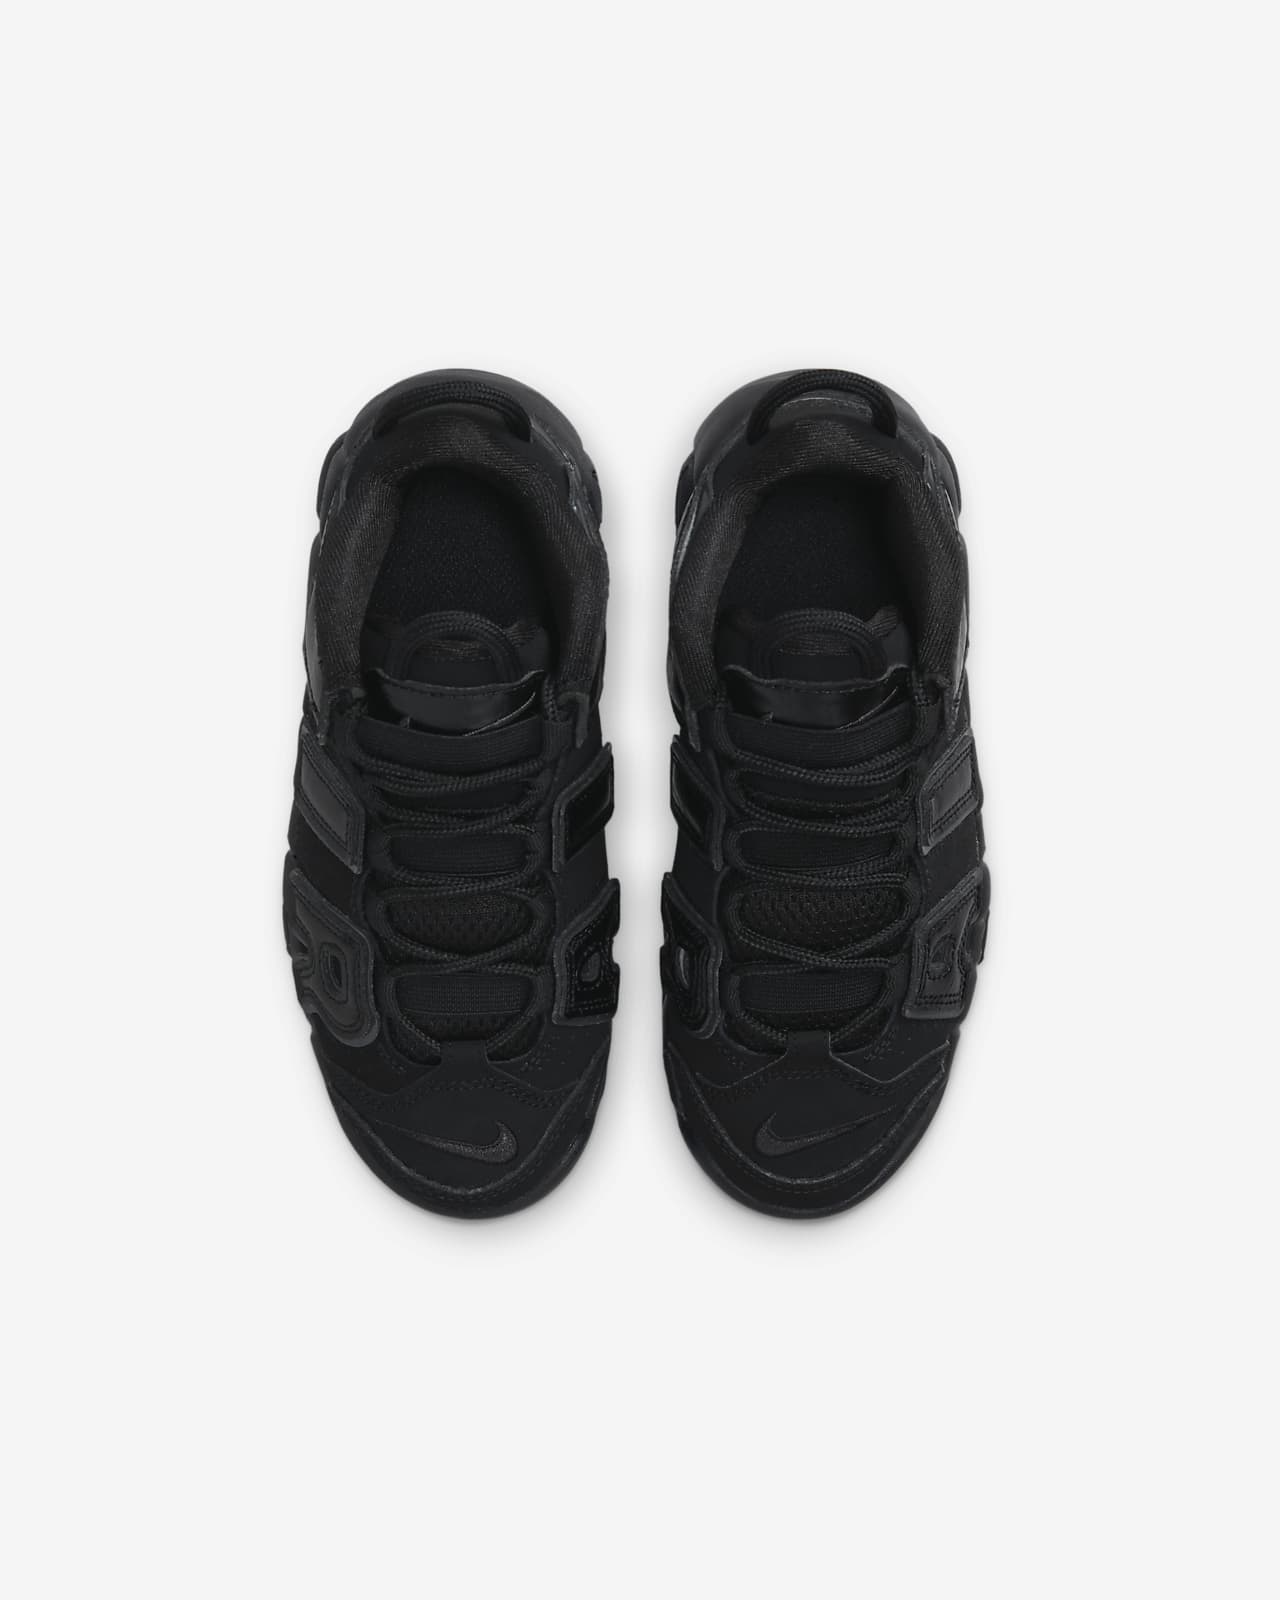 Nike Air More Uptempo Little Kids' Shoes Black